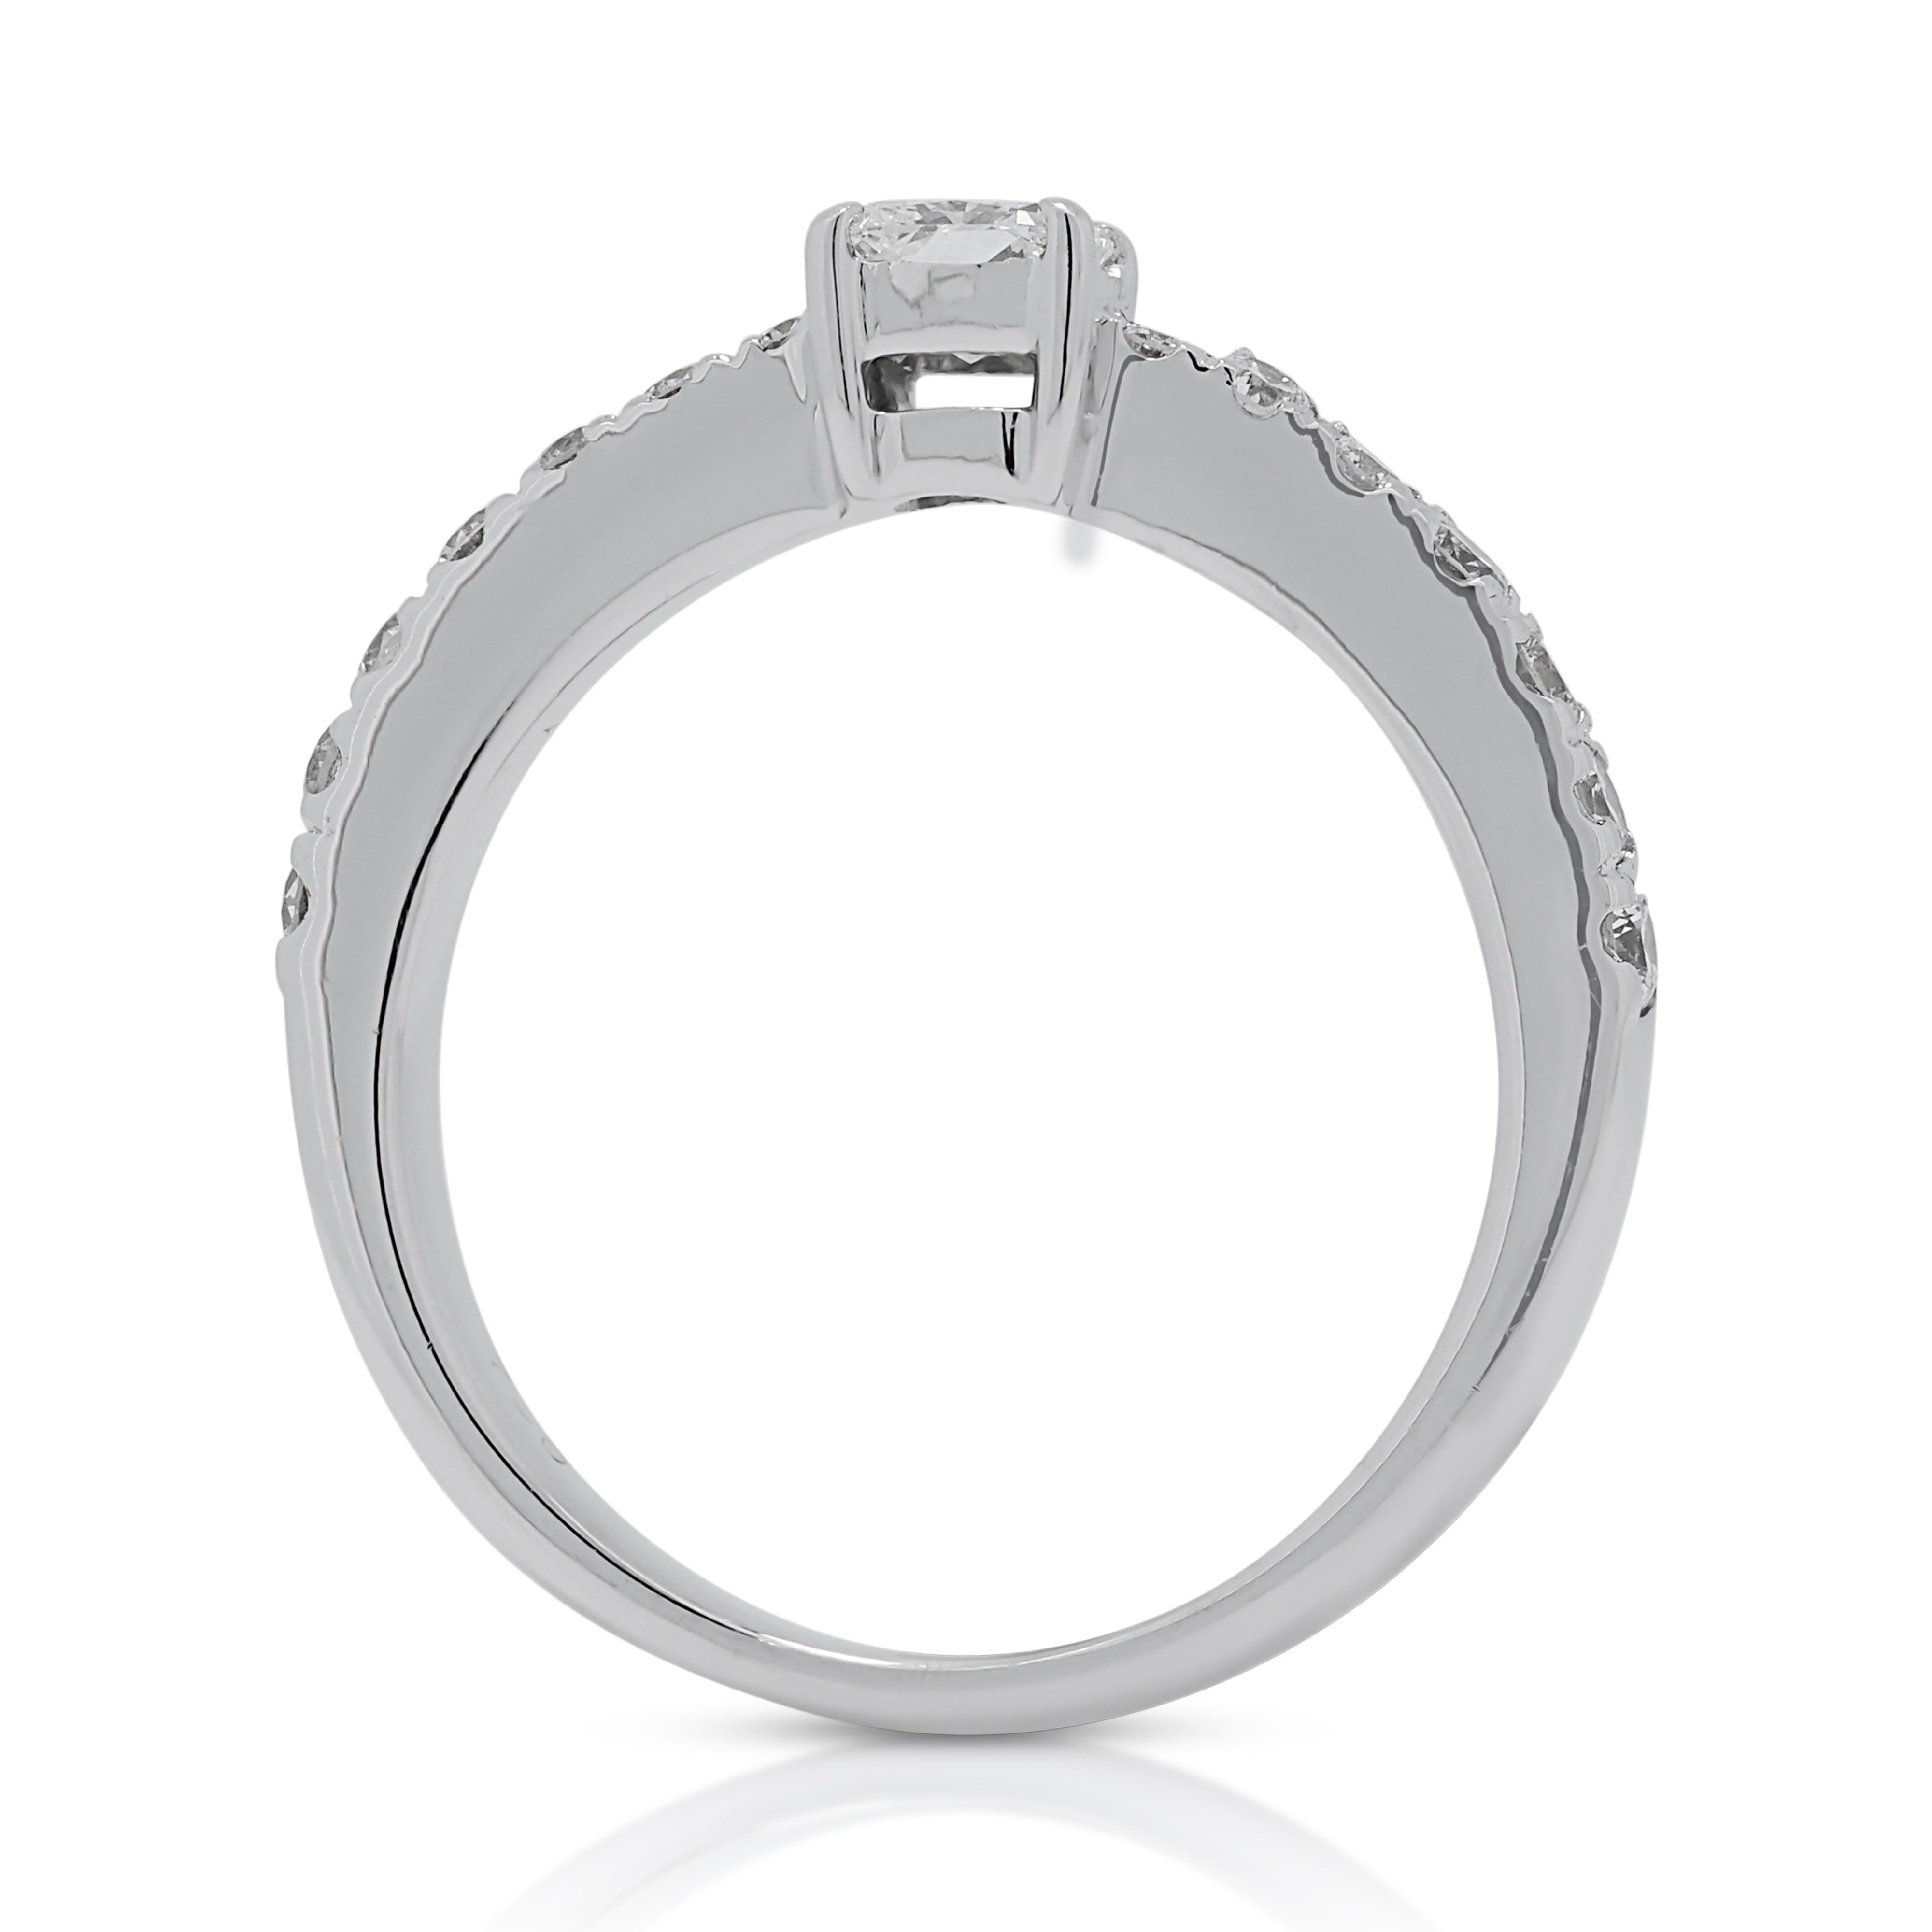 Sparkling 0.42ct Diamonds Pave Ring in 18K White Gold For Sale 2